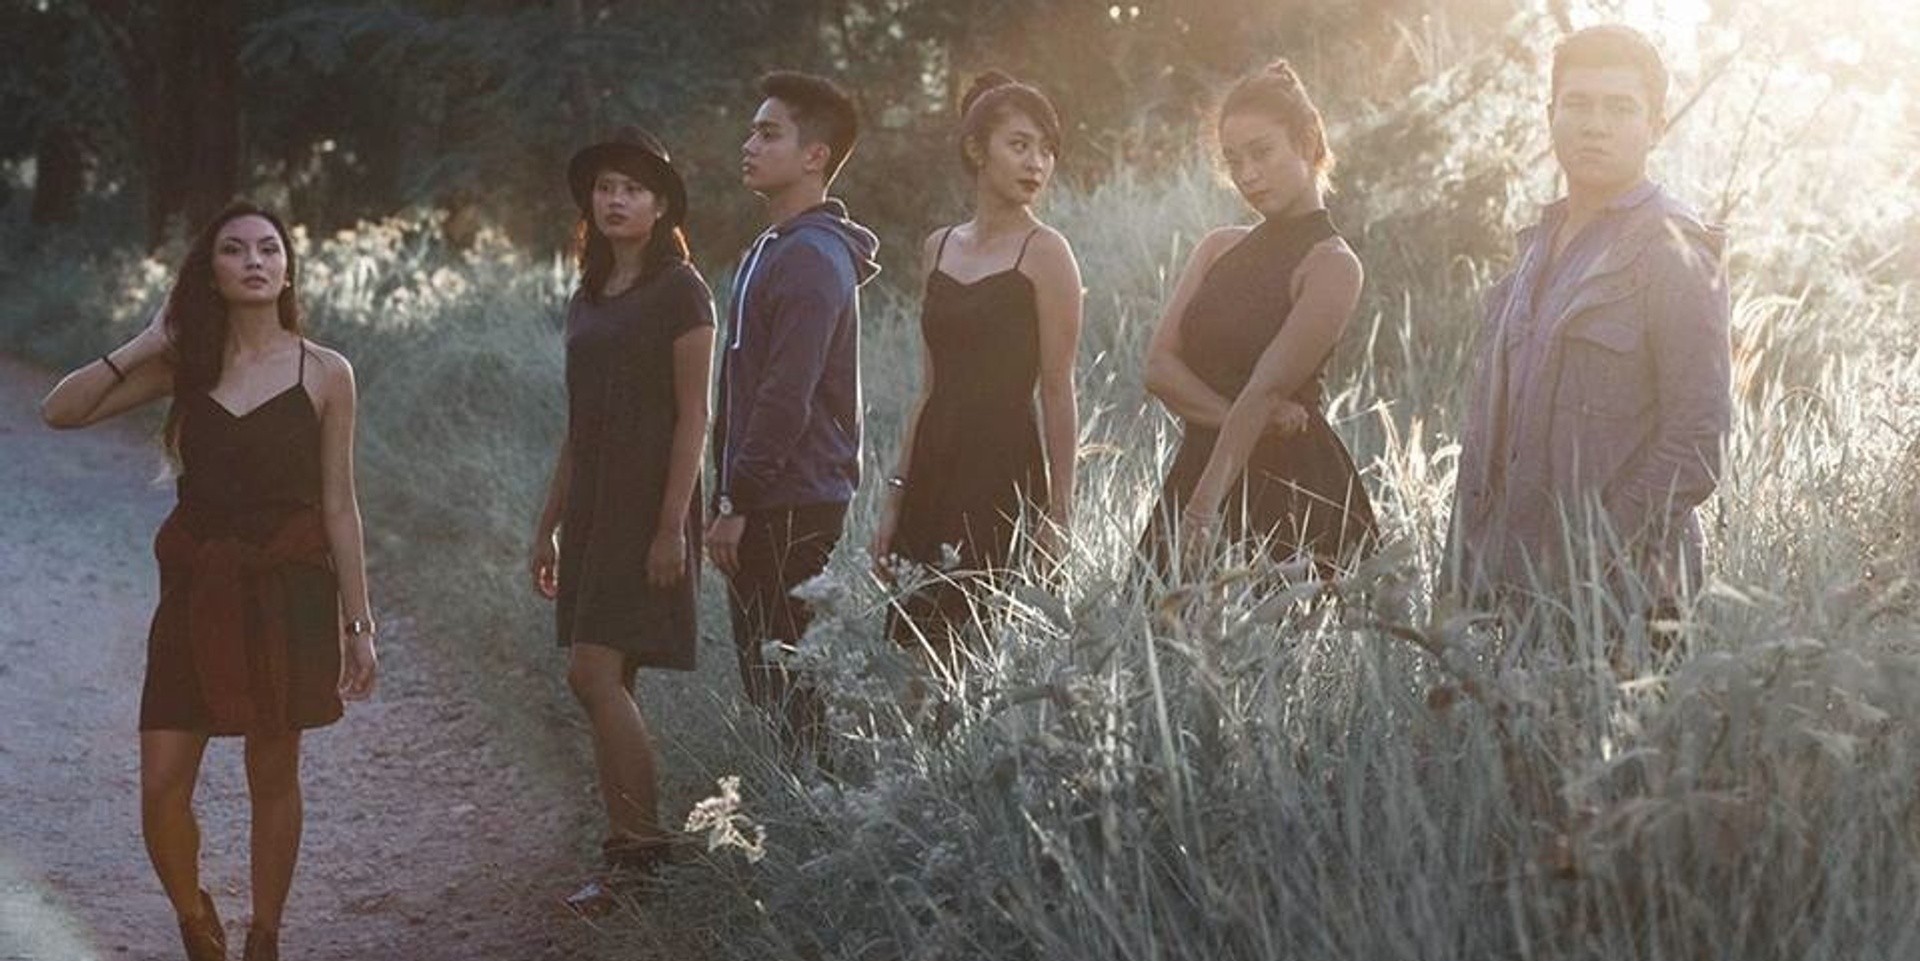 The Ransom Collective and A SPACE Philippines team up for an intimate music video launch of 'Open Road'